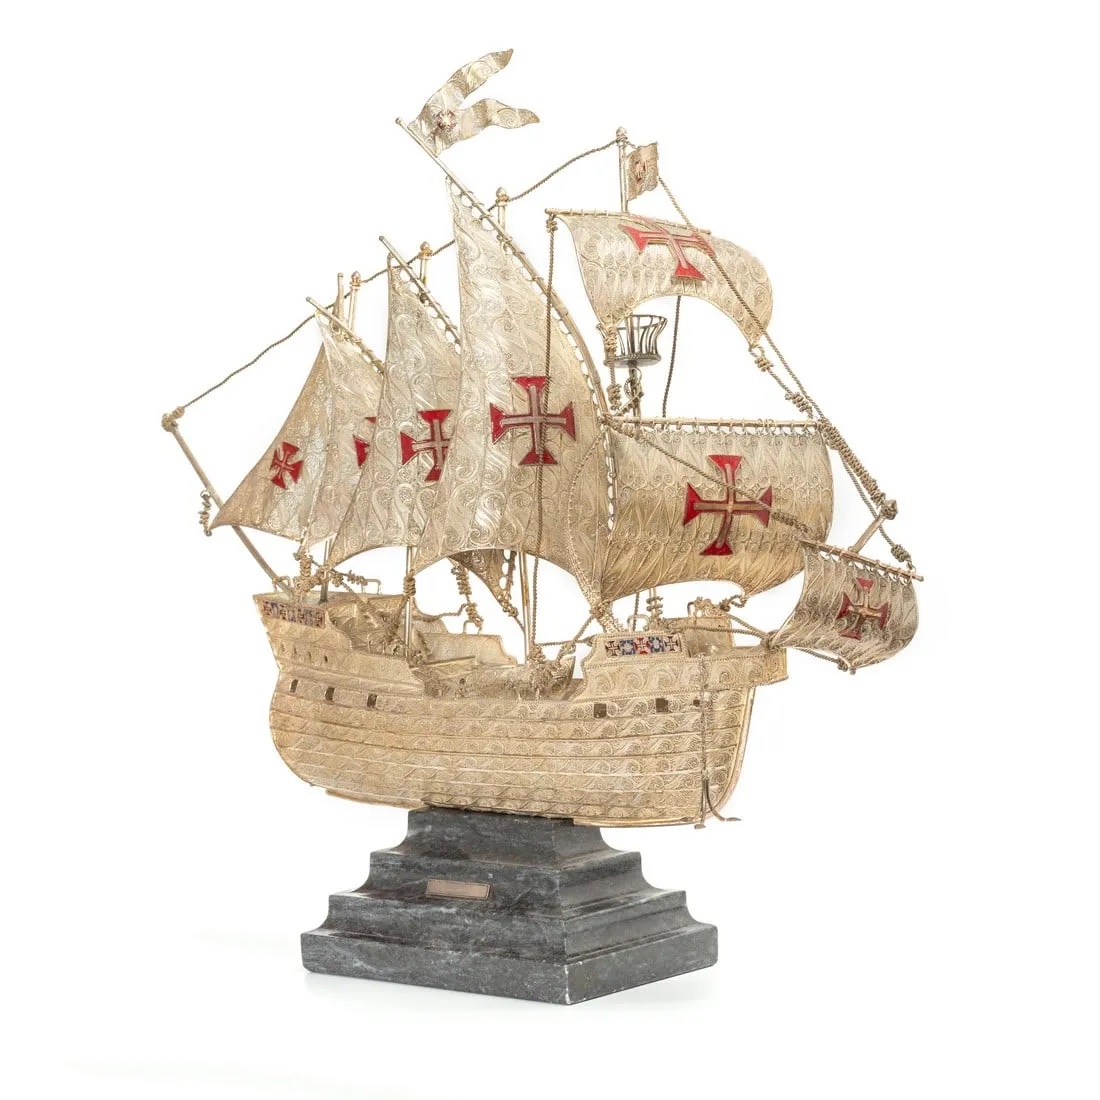 Portuguese caravel in sterling silver, estimated at $18,000-$22,000 at Jasper52.